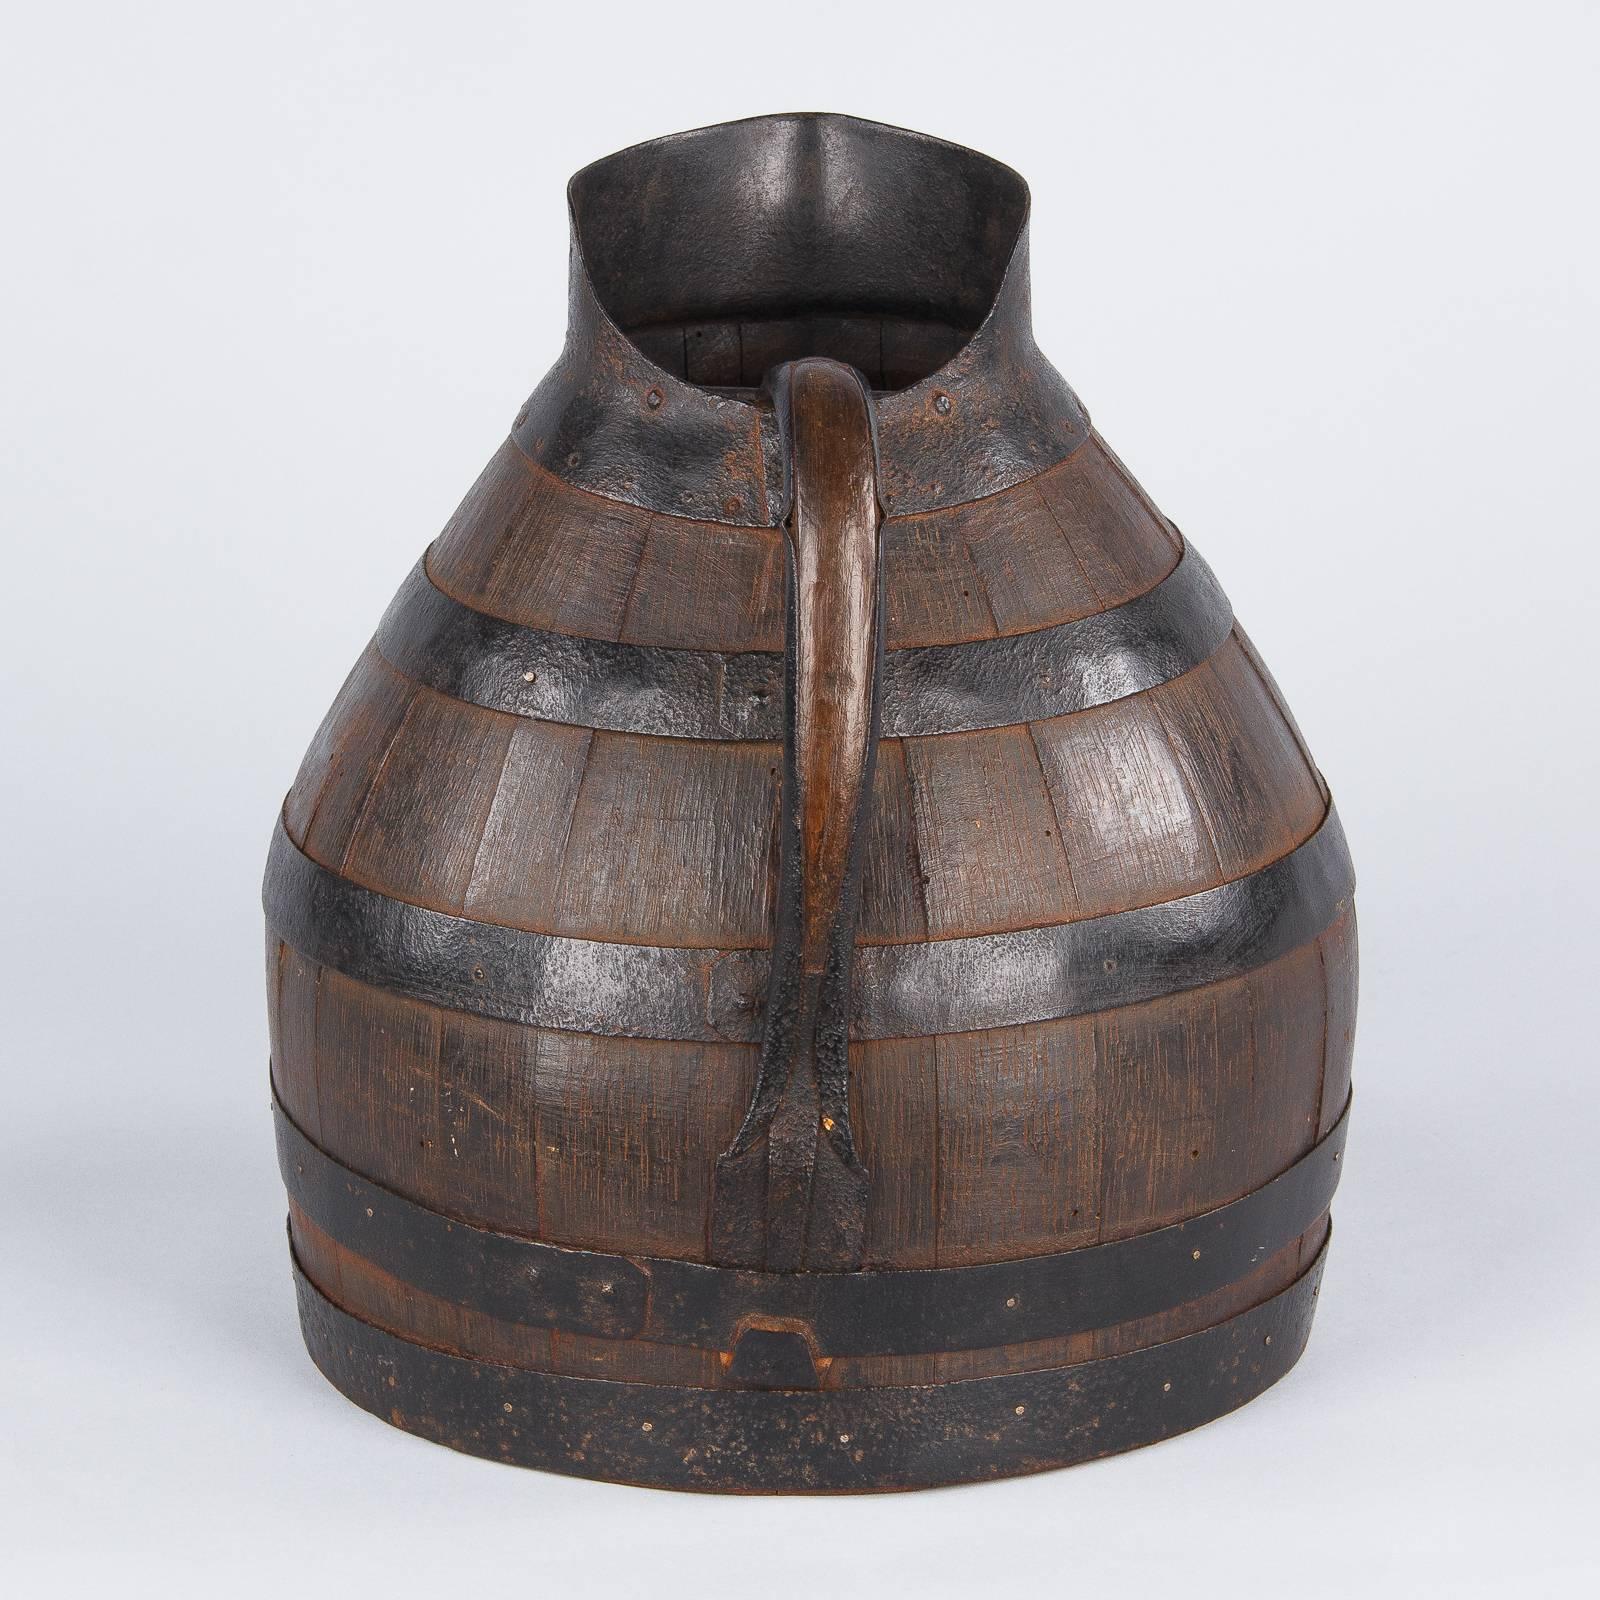 A wine pitcher made of oak with metal straps and spout purchased in Provence.